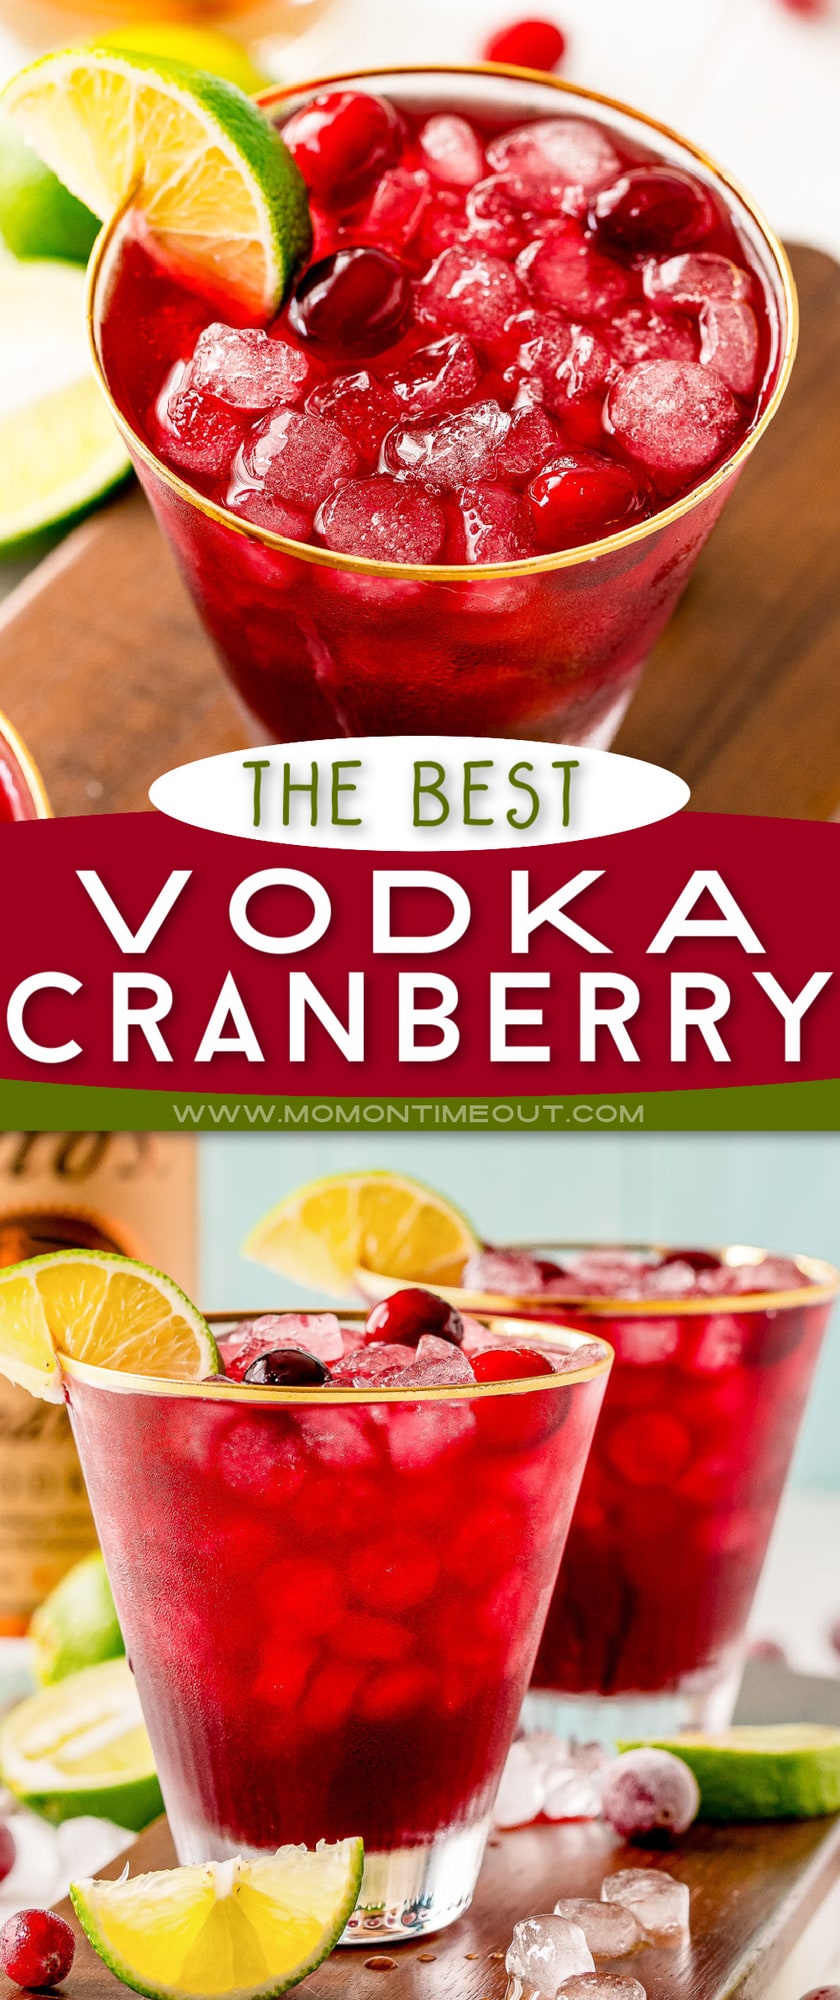 Vodka Cranberry Cocktail Cape Cod Drink Mom On Timeout